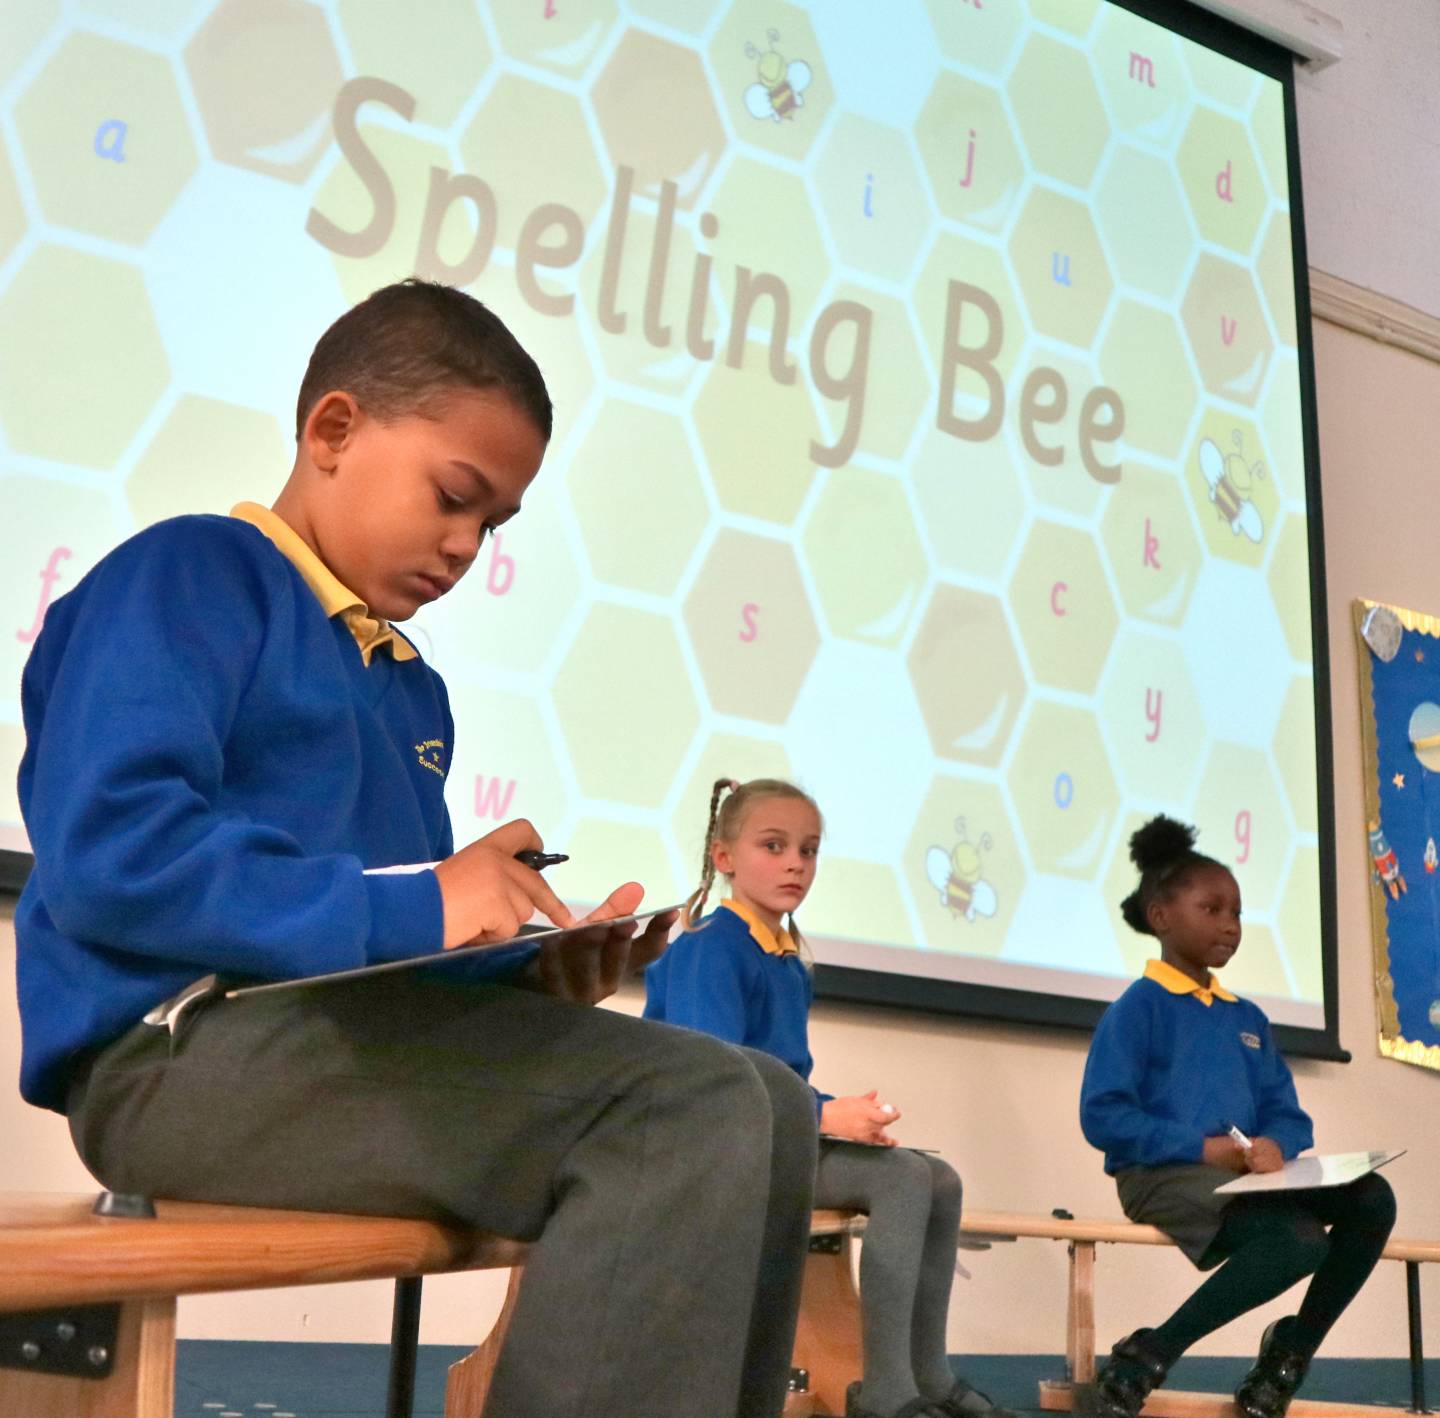 Spelling Bee Competition Devonshire Hill Nursery and Primary School